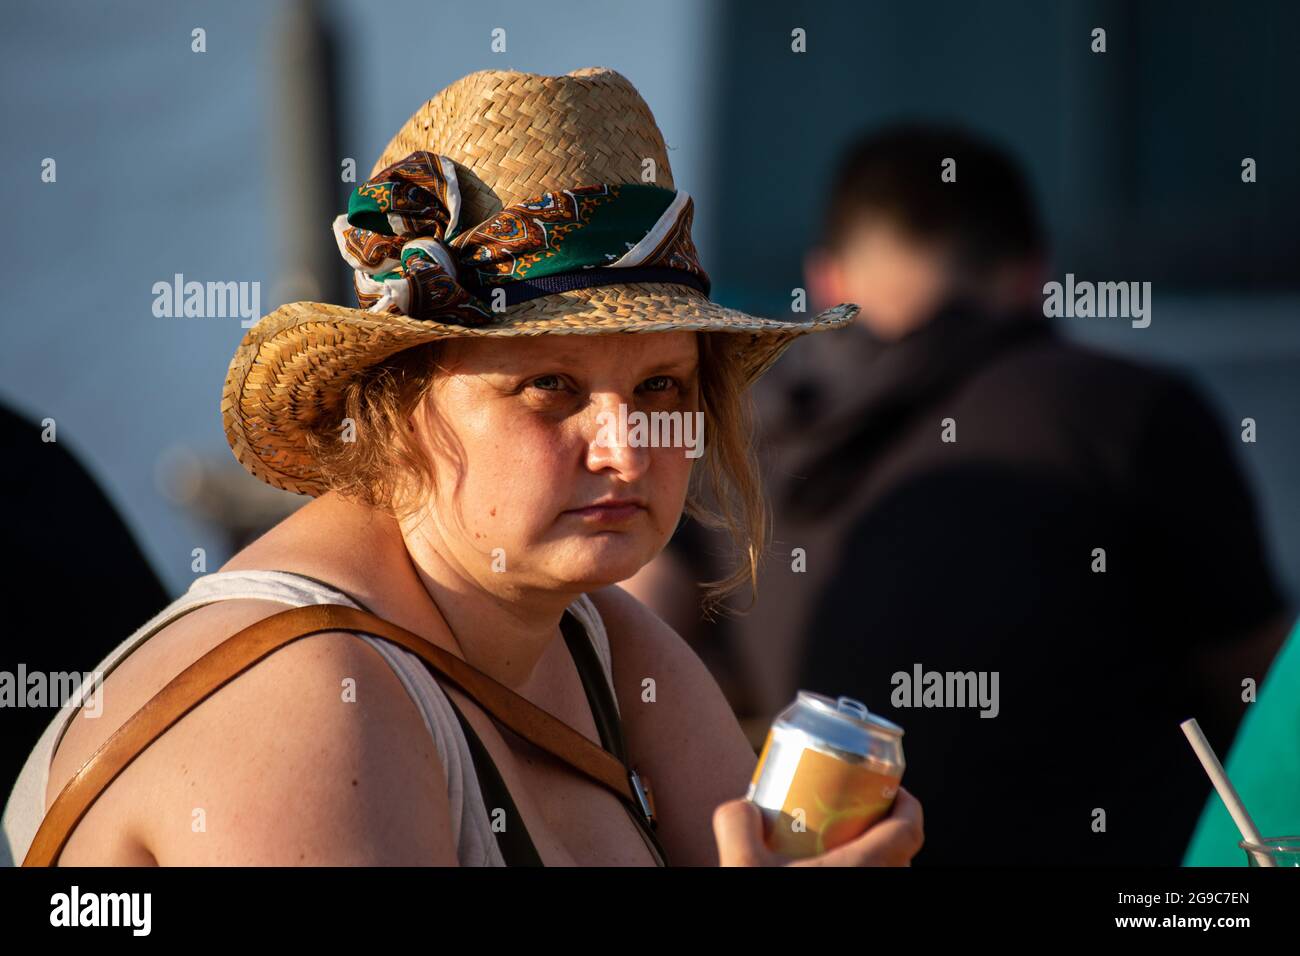 Woman wearing straw hat or summer hat or sun hat Stock Photo